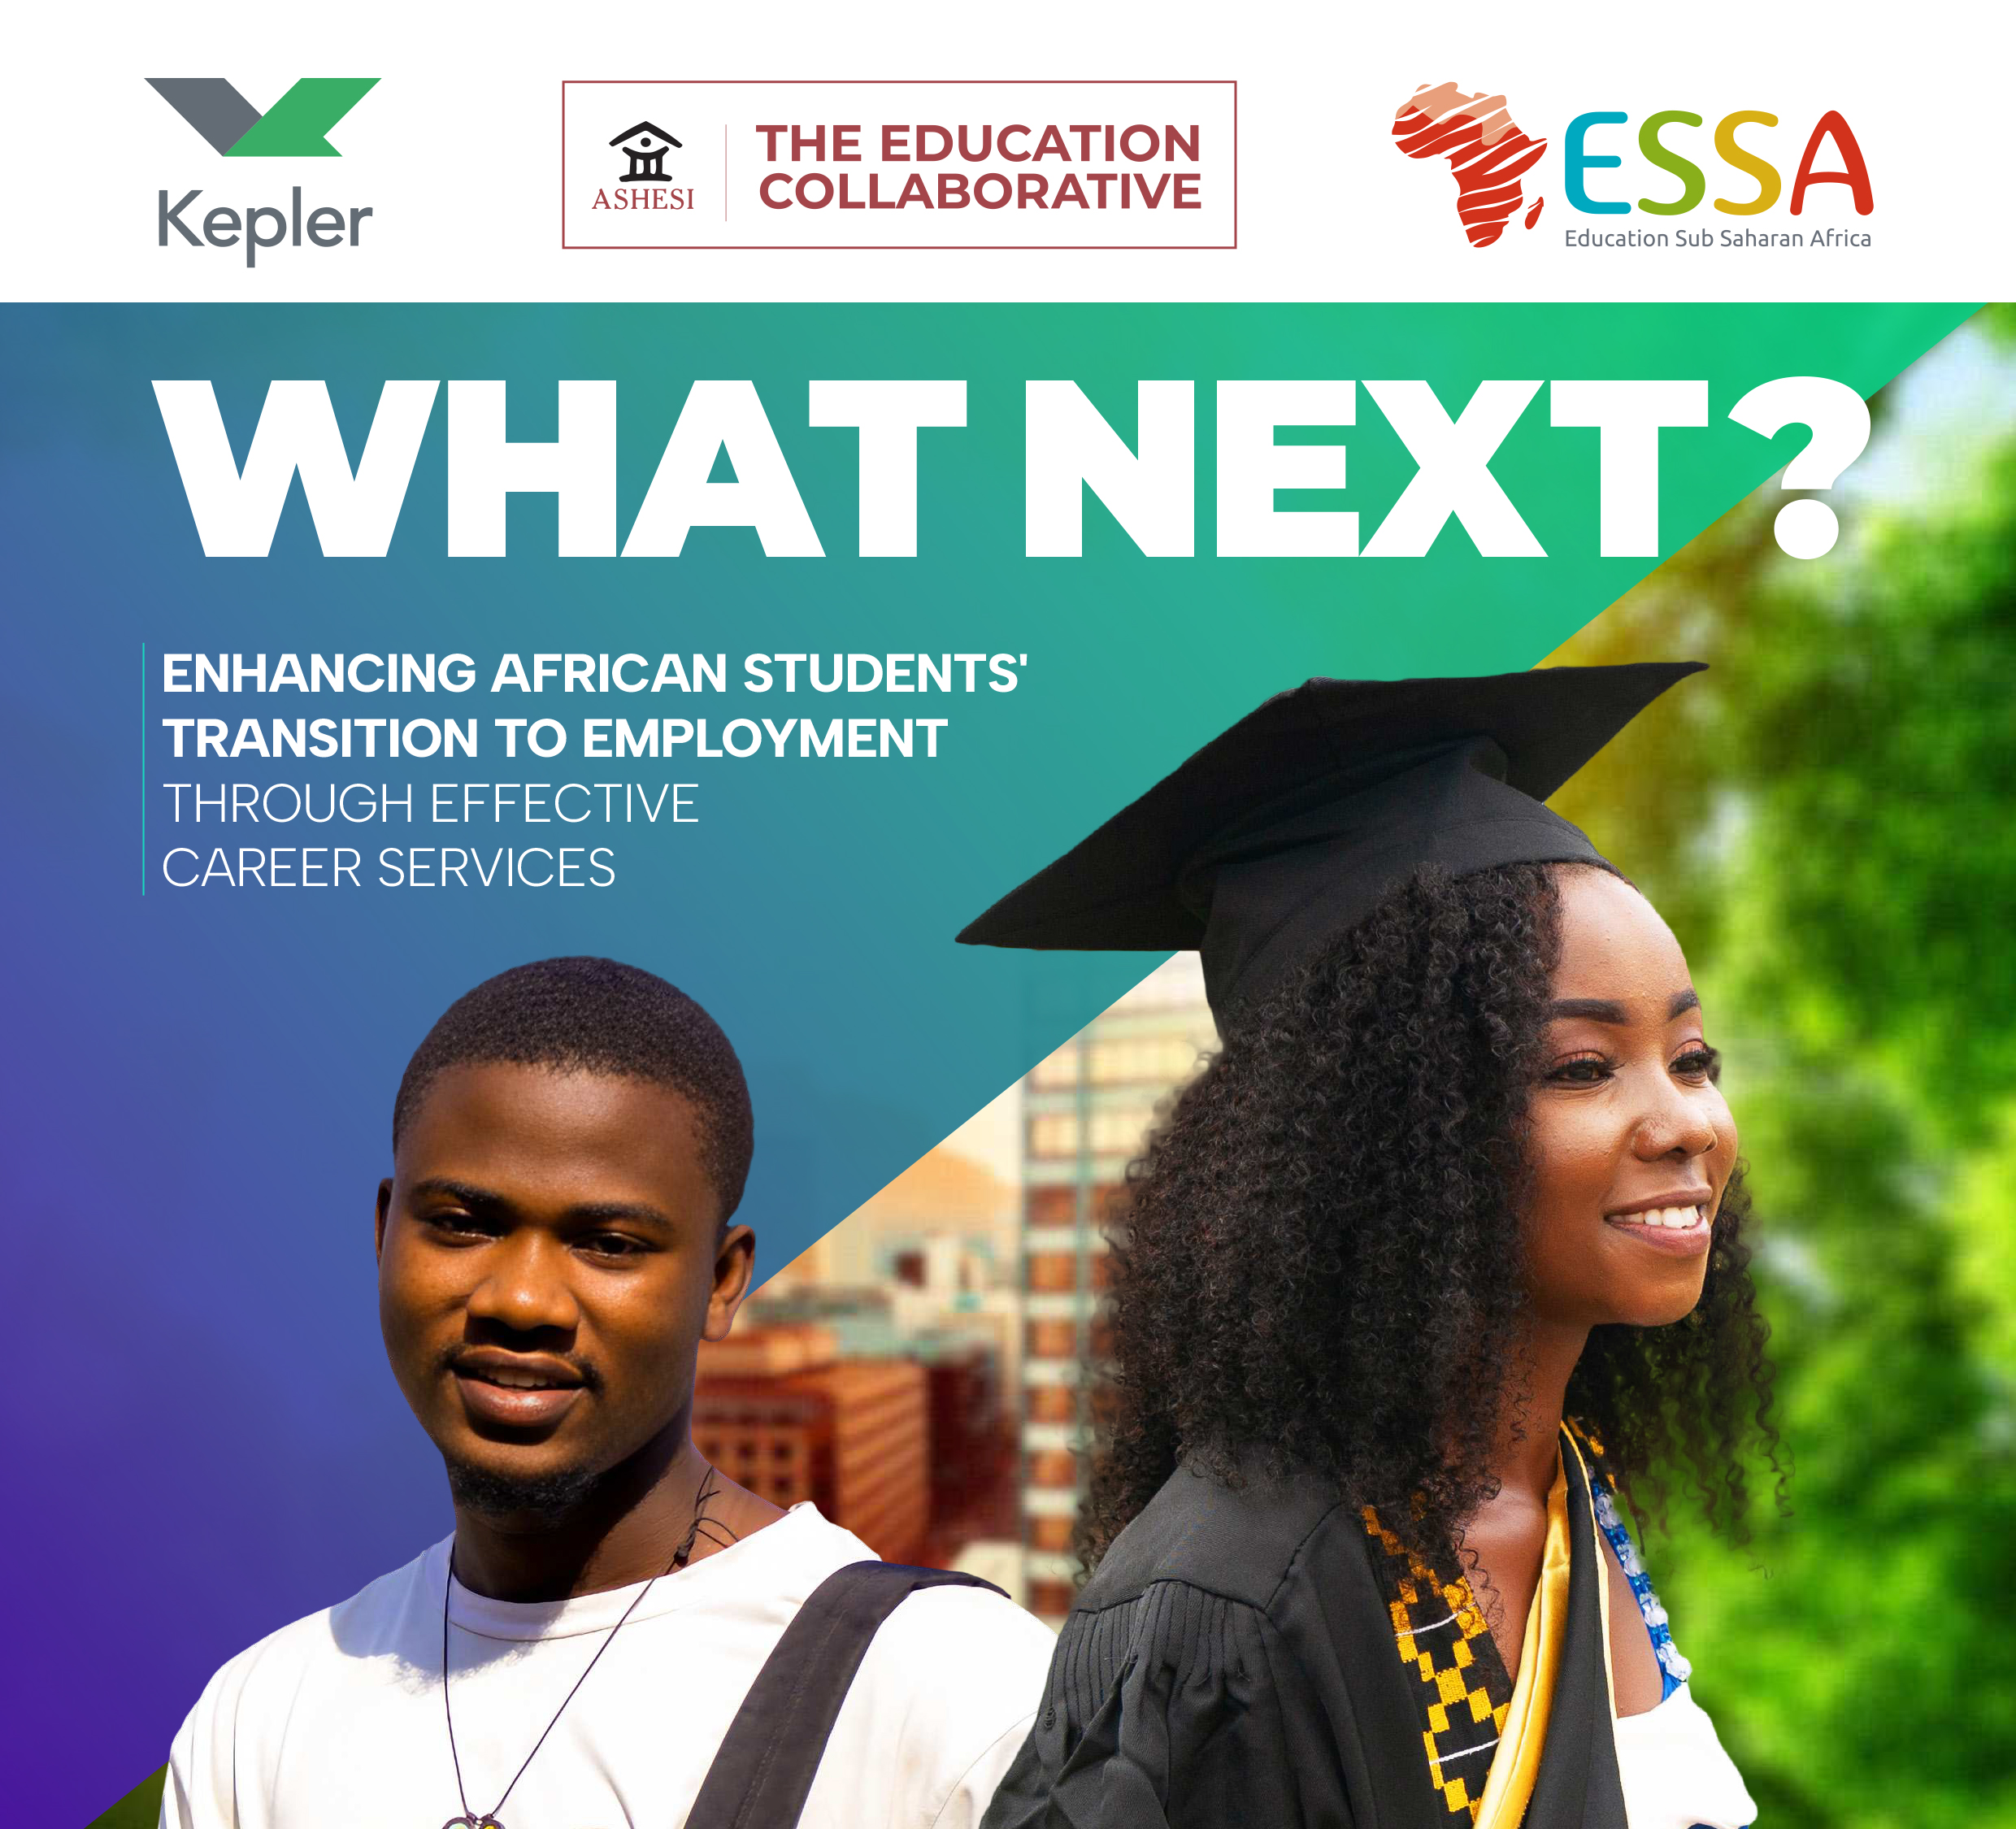 The report provides valuable insights and recommendations to bridge the gap between education and employment. ESSA conducted the research in partnership with The Education Collaborative at Ashesi University and Kepler University in Rwanda, with financial support from Dubai Cares.